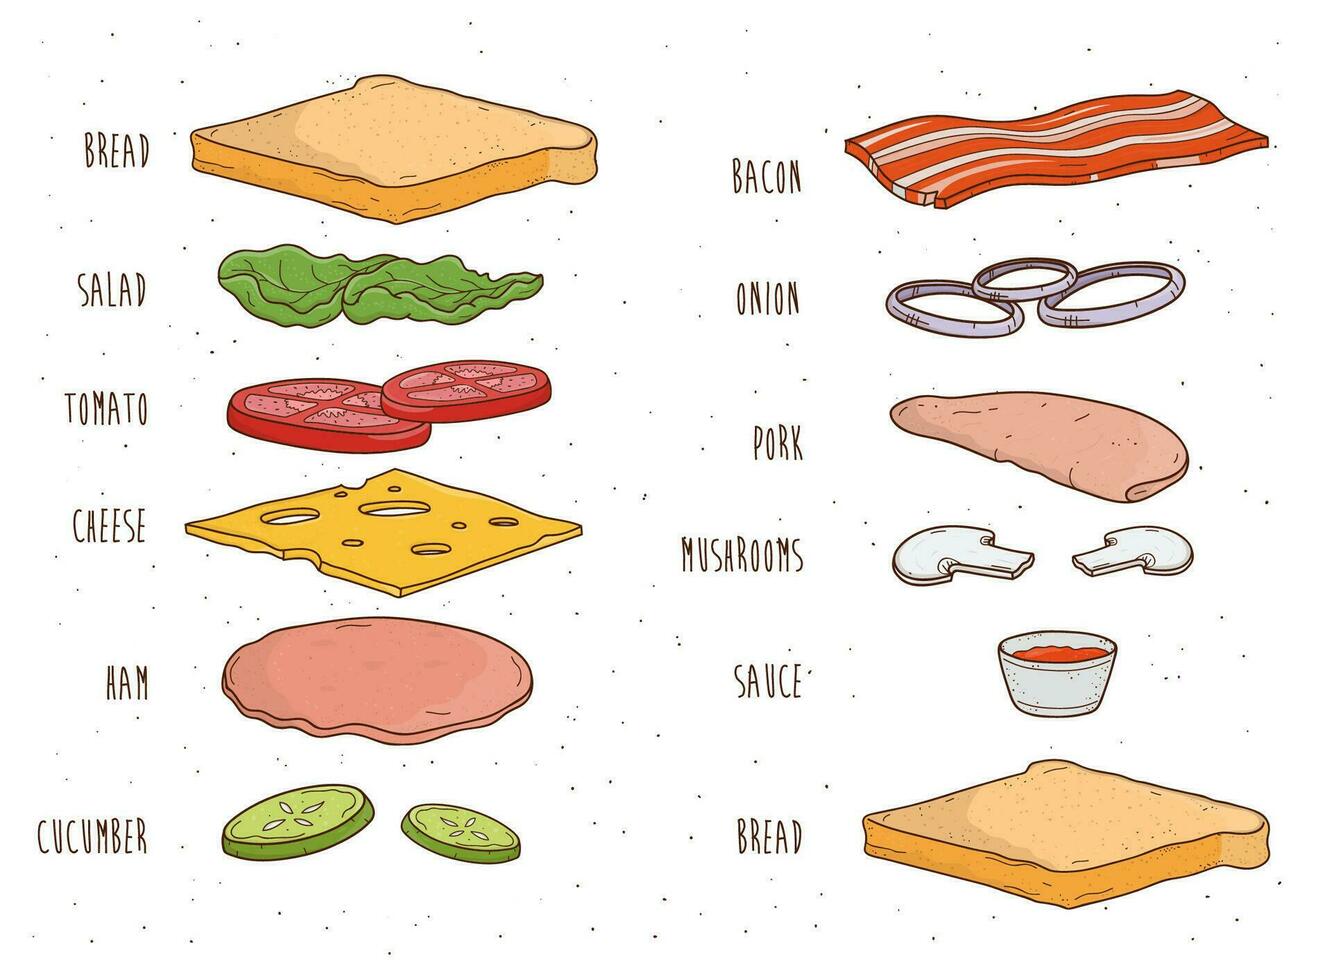 Sandwich ingredients separately. Bread, salad, tomato, cheese, sauce, mushrooms, bacon, onion. Colorful hand drawn vector illustration.